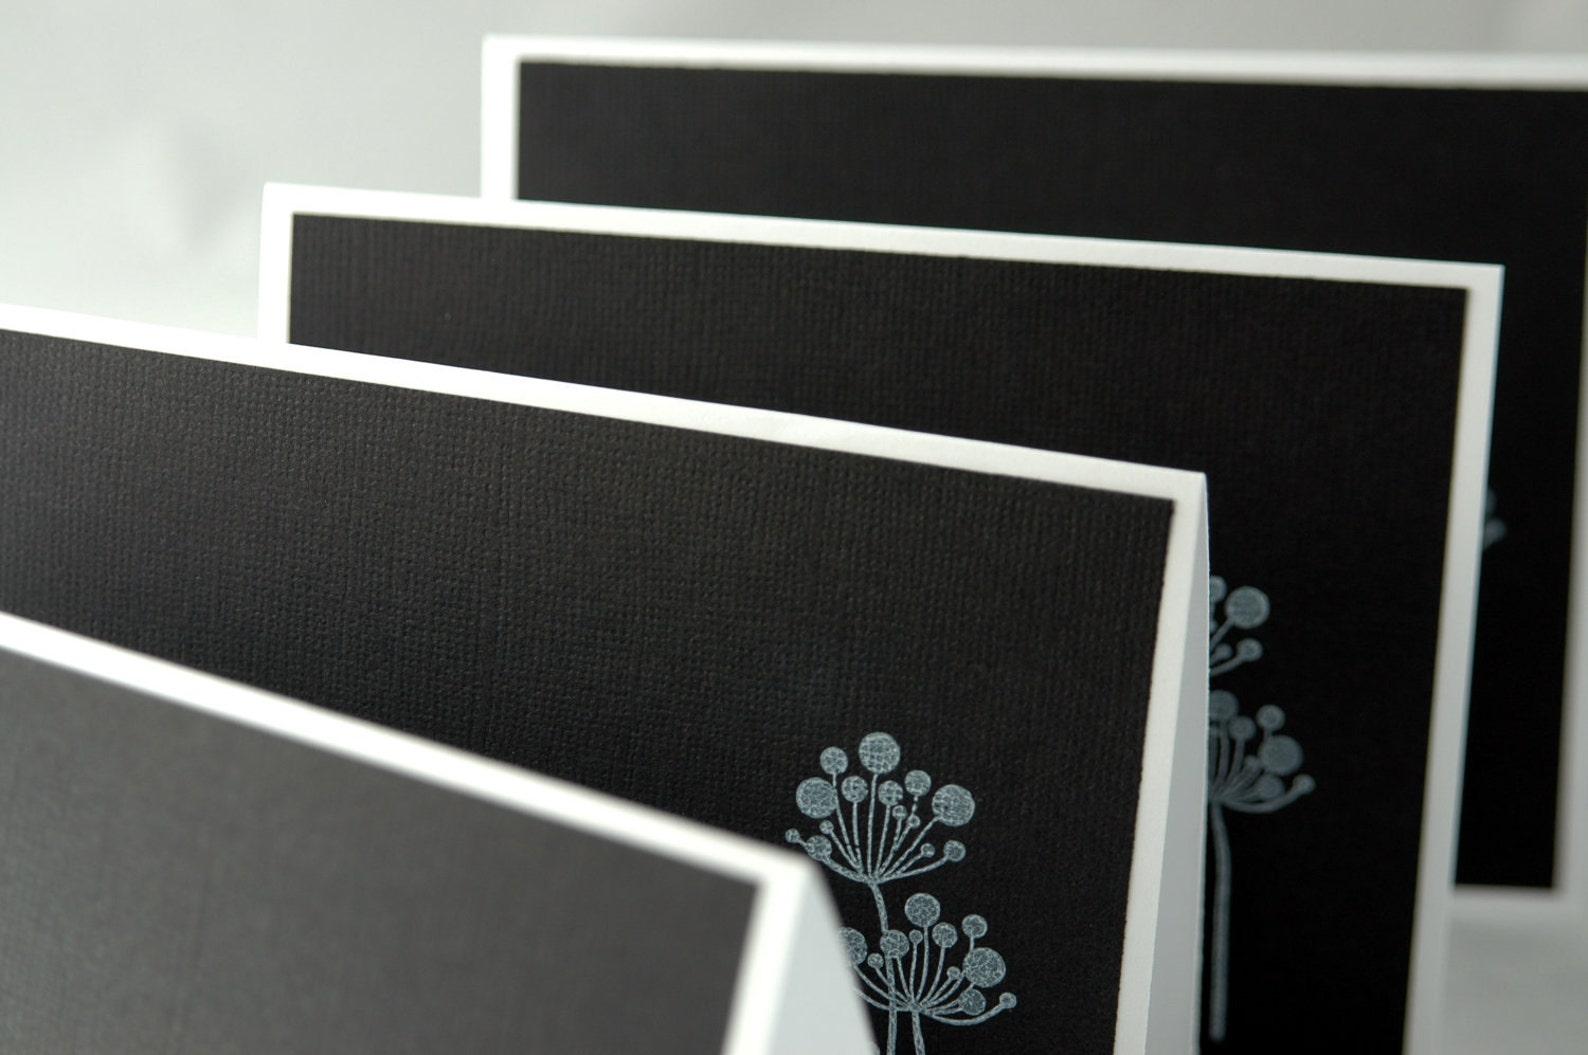 handmade-black-and-white-note-cards-hello-friend-just-etsy